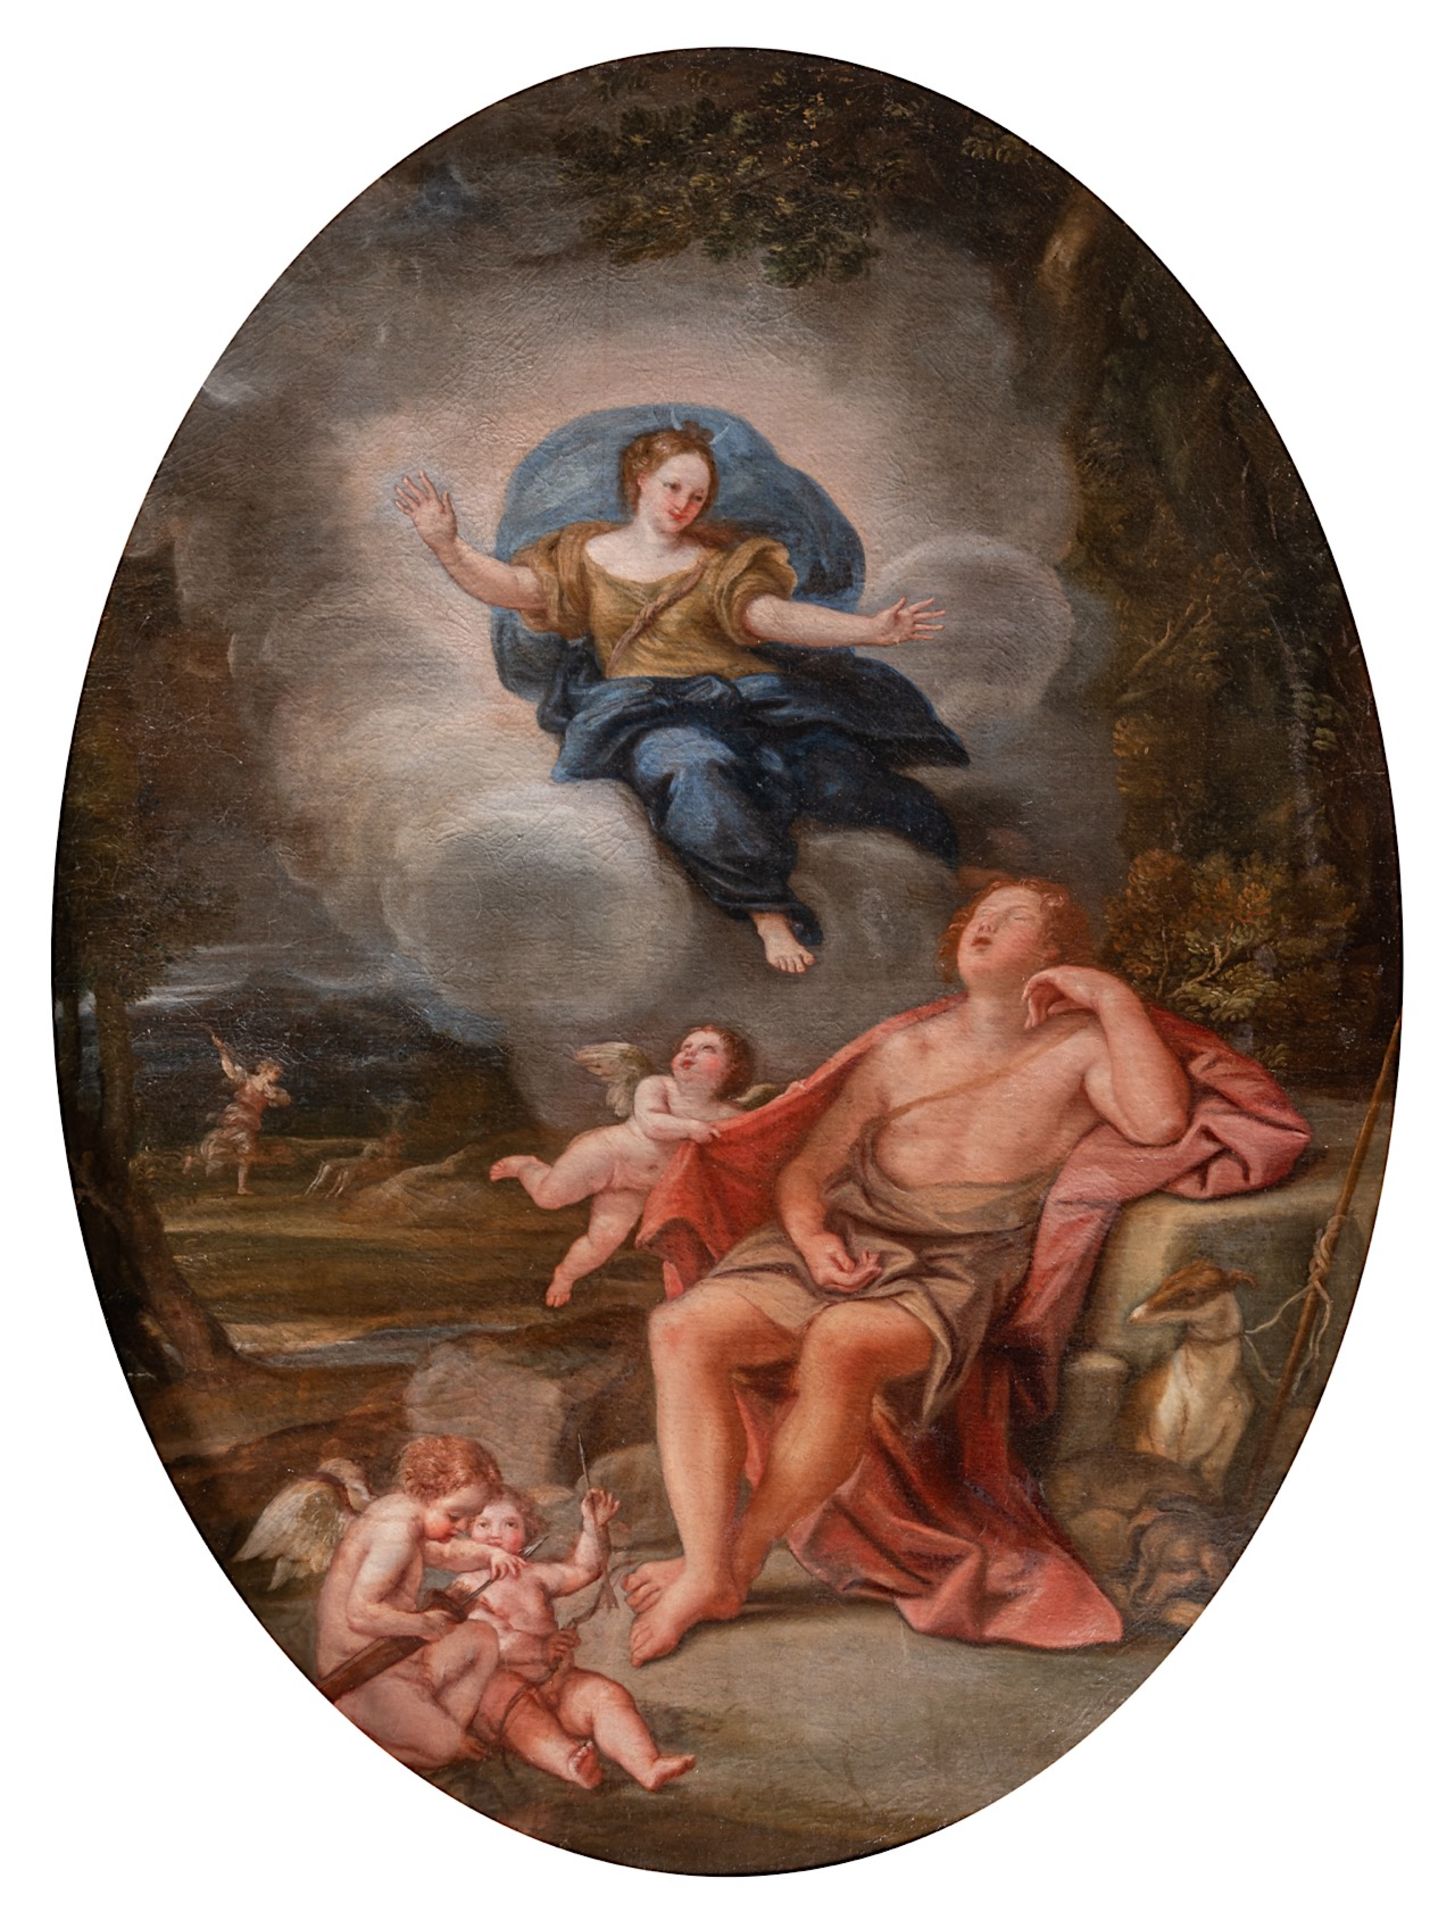 No visible signature, 'Diana and Endymion', 18thC, oil on canvas 120 x 90 cm. (47.2 x 35.4 in.), Fra